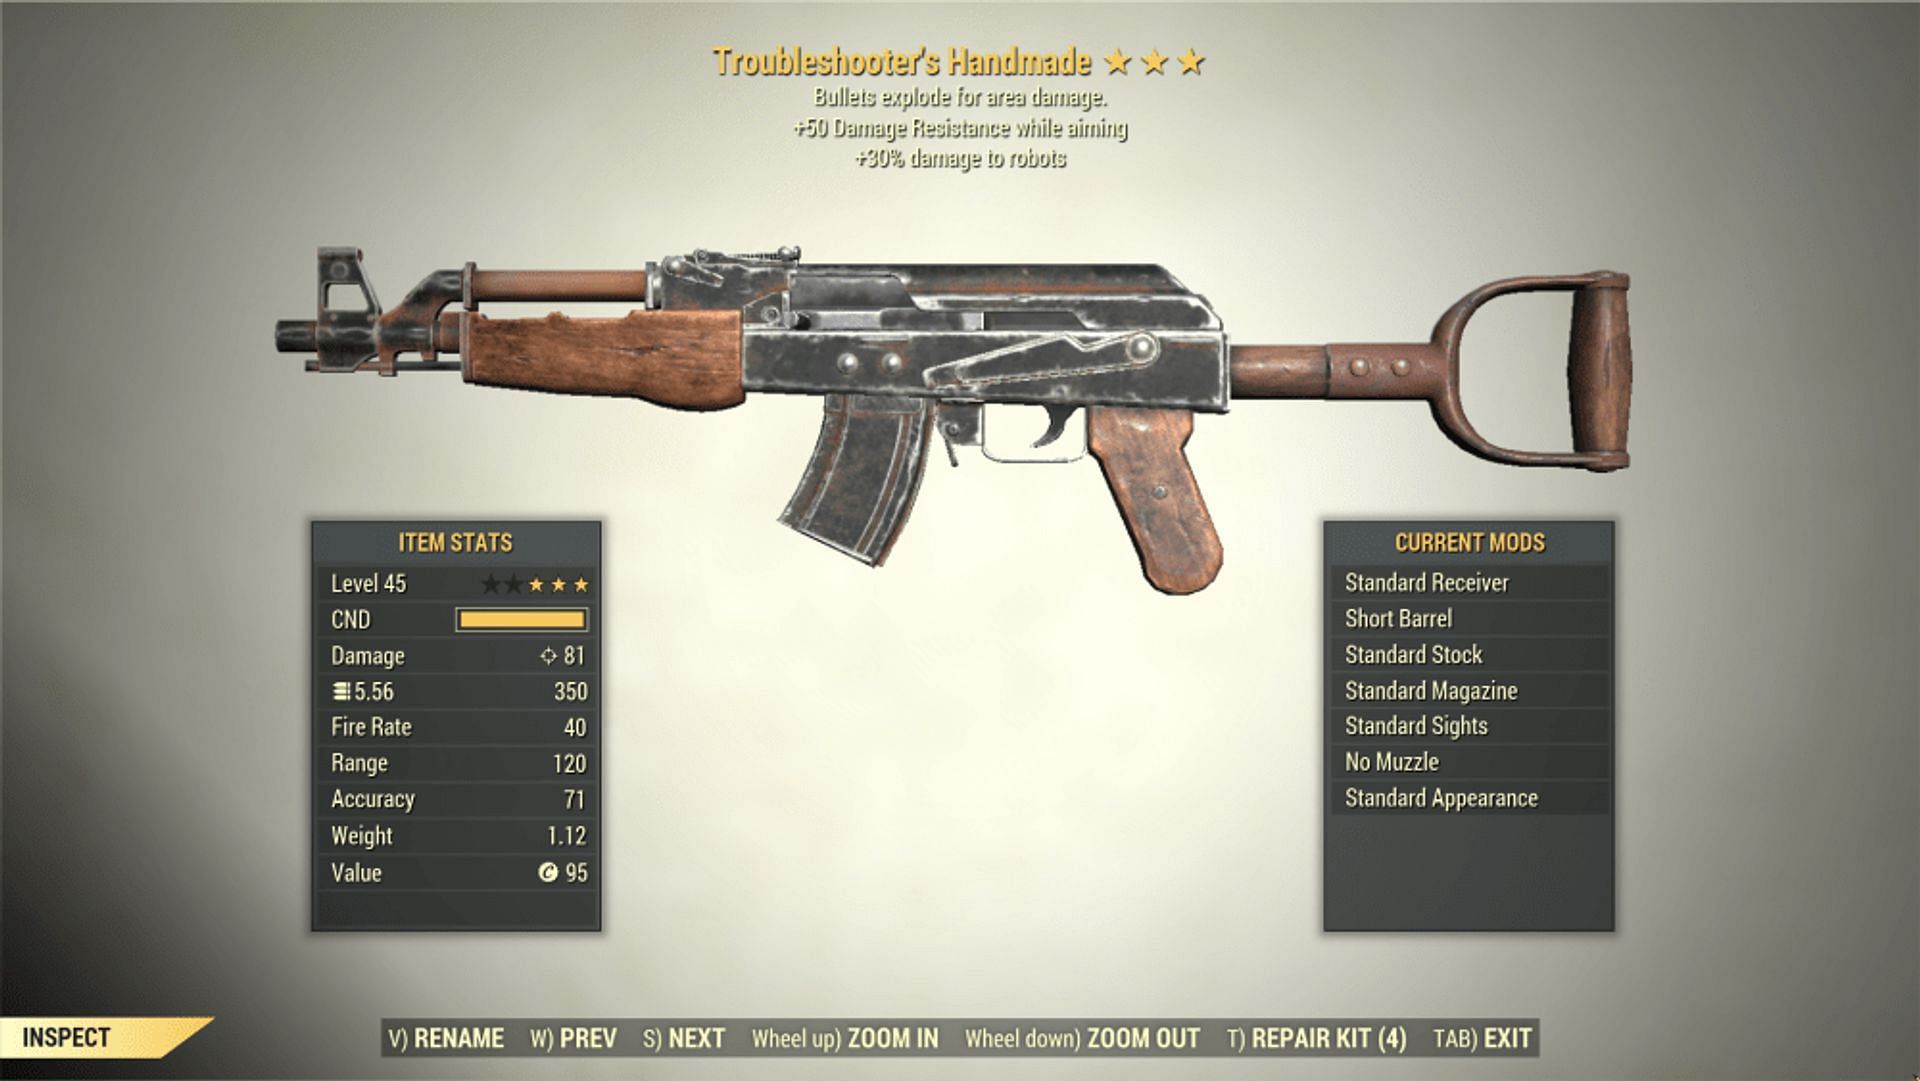 The Handmade Rifle as it appears in Fallout 76 (Image via Bethesda)